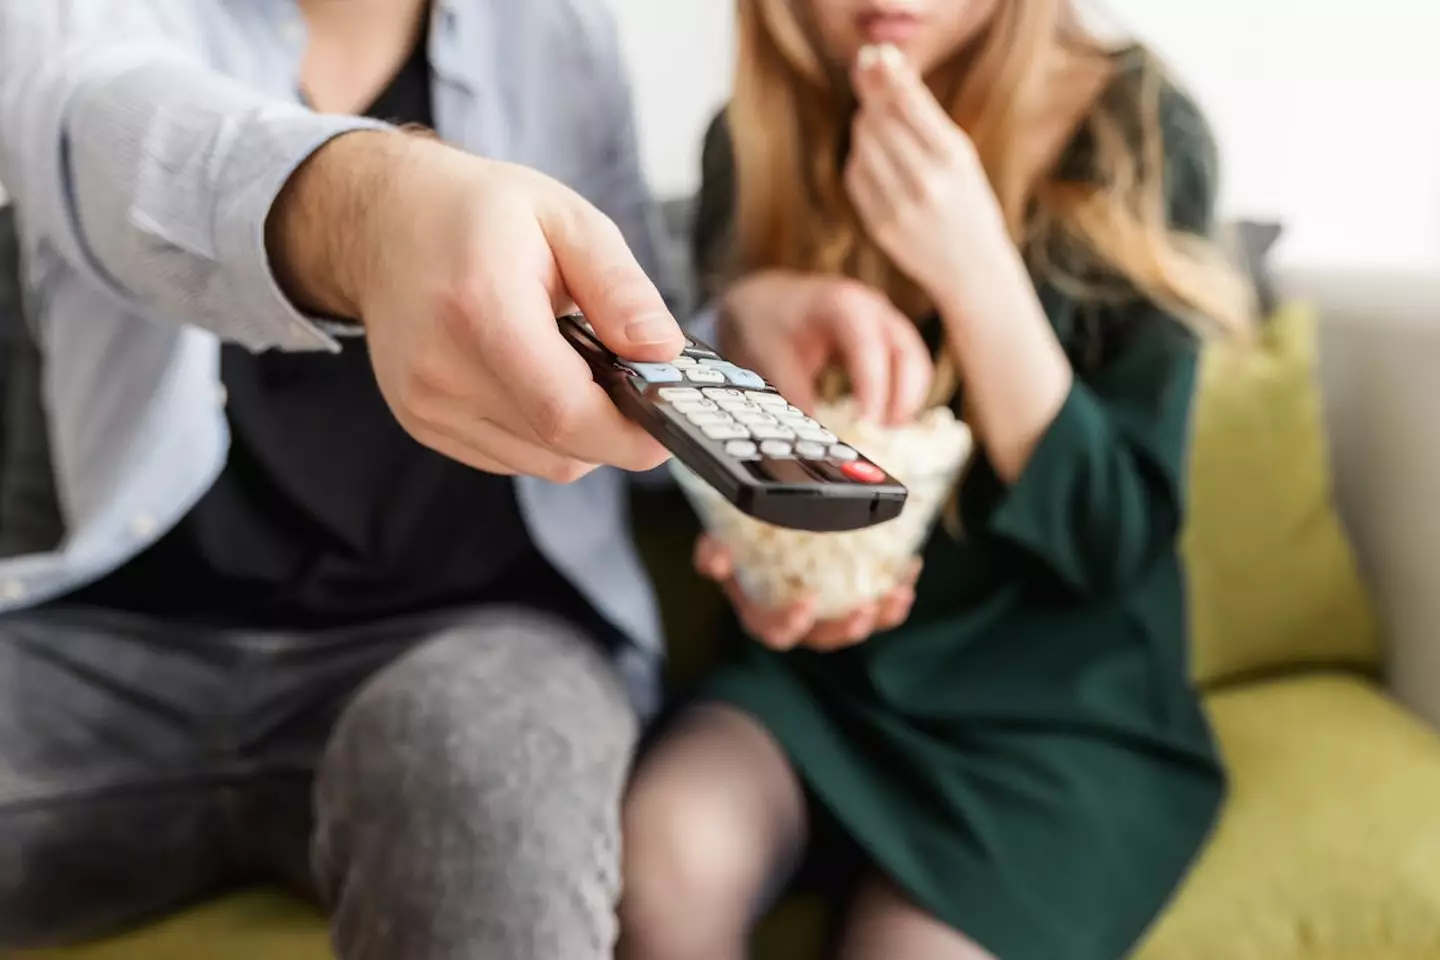 From April onwards, the annual cost of a standard TV Licence will cost you £169.50.